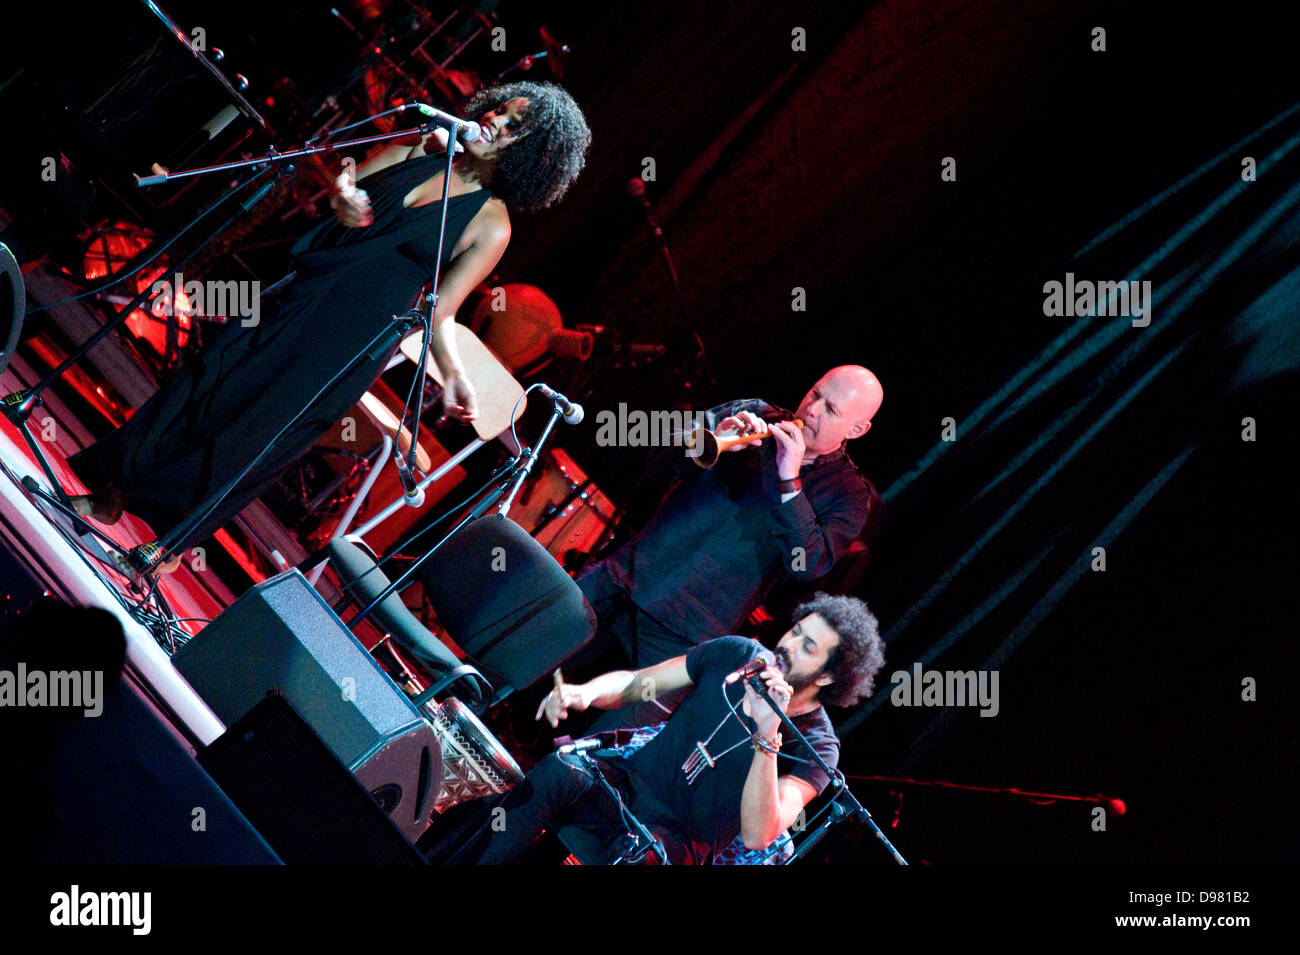 Idan Raichel Project on stage during Cross Culture Festival in Warsaw, Poland. Stock Photo